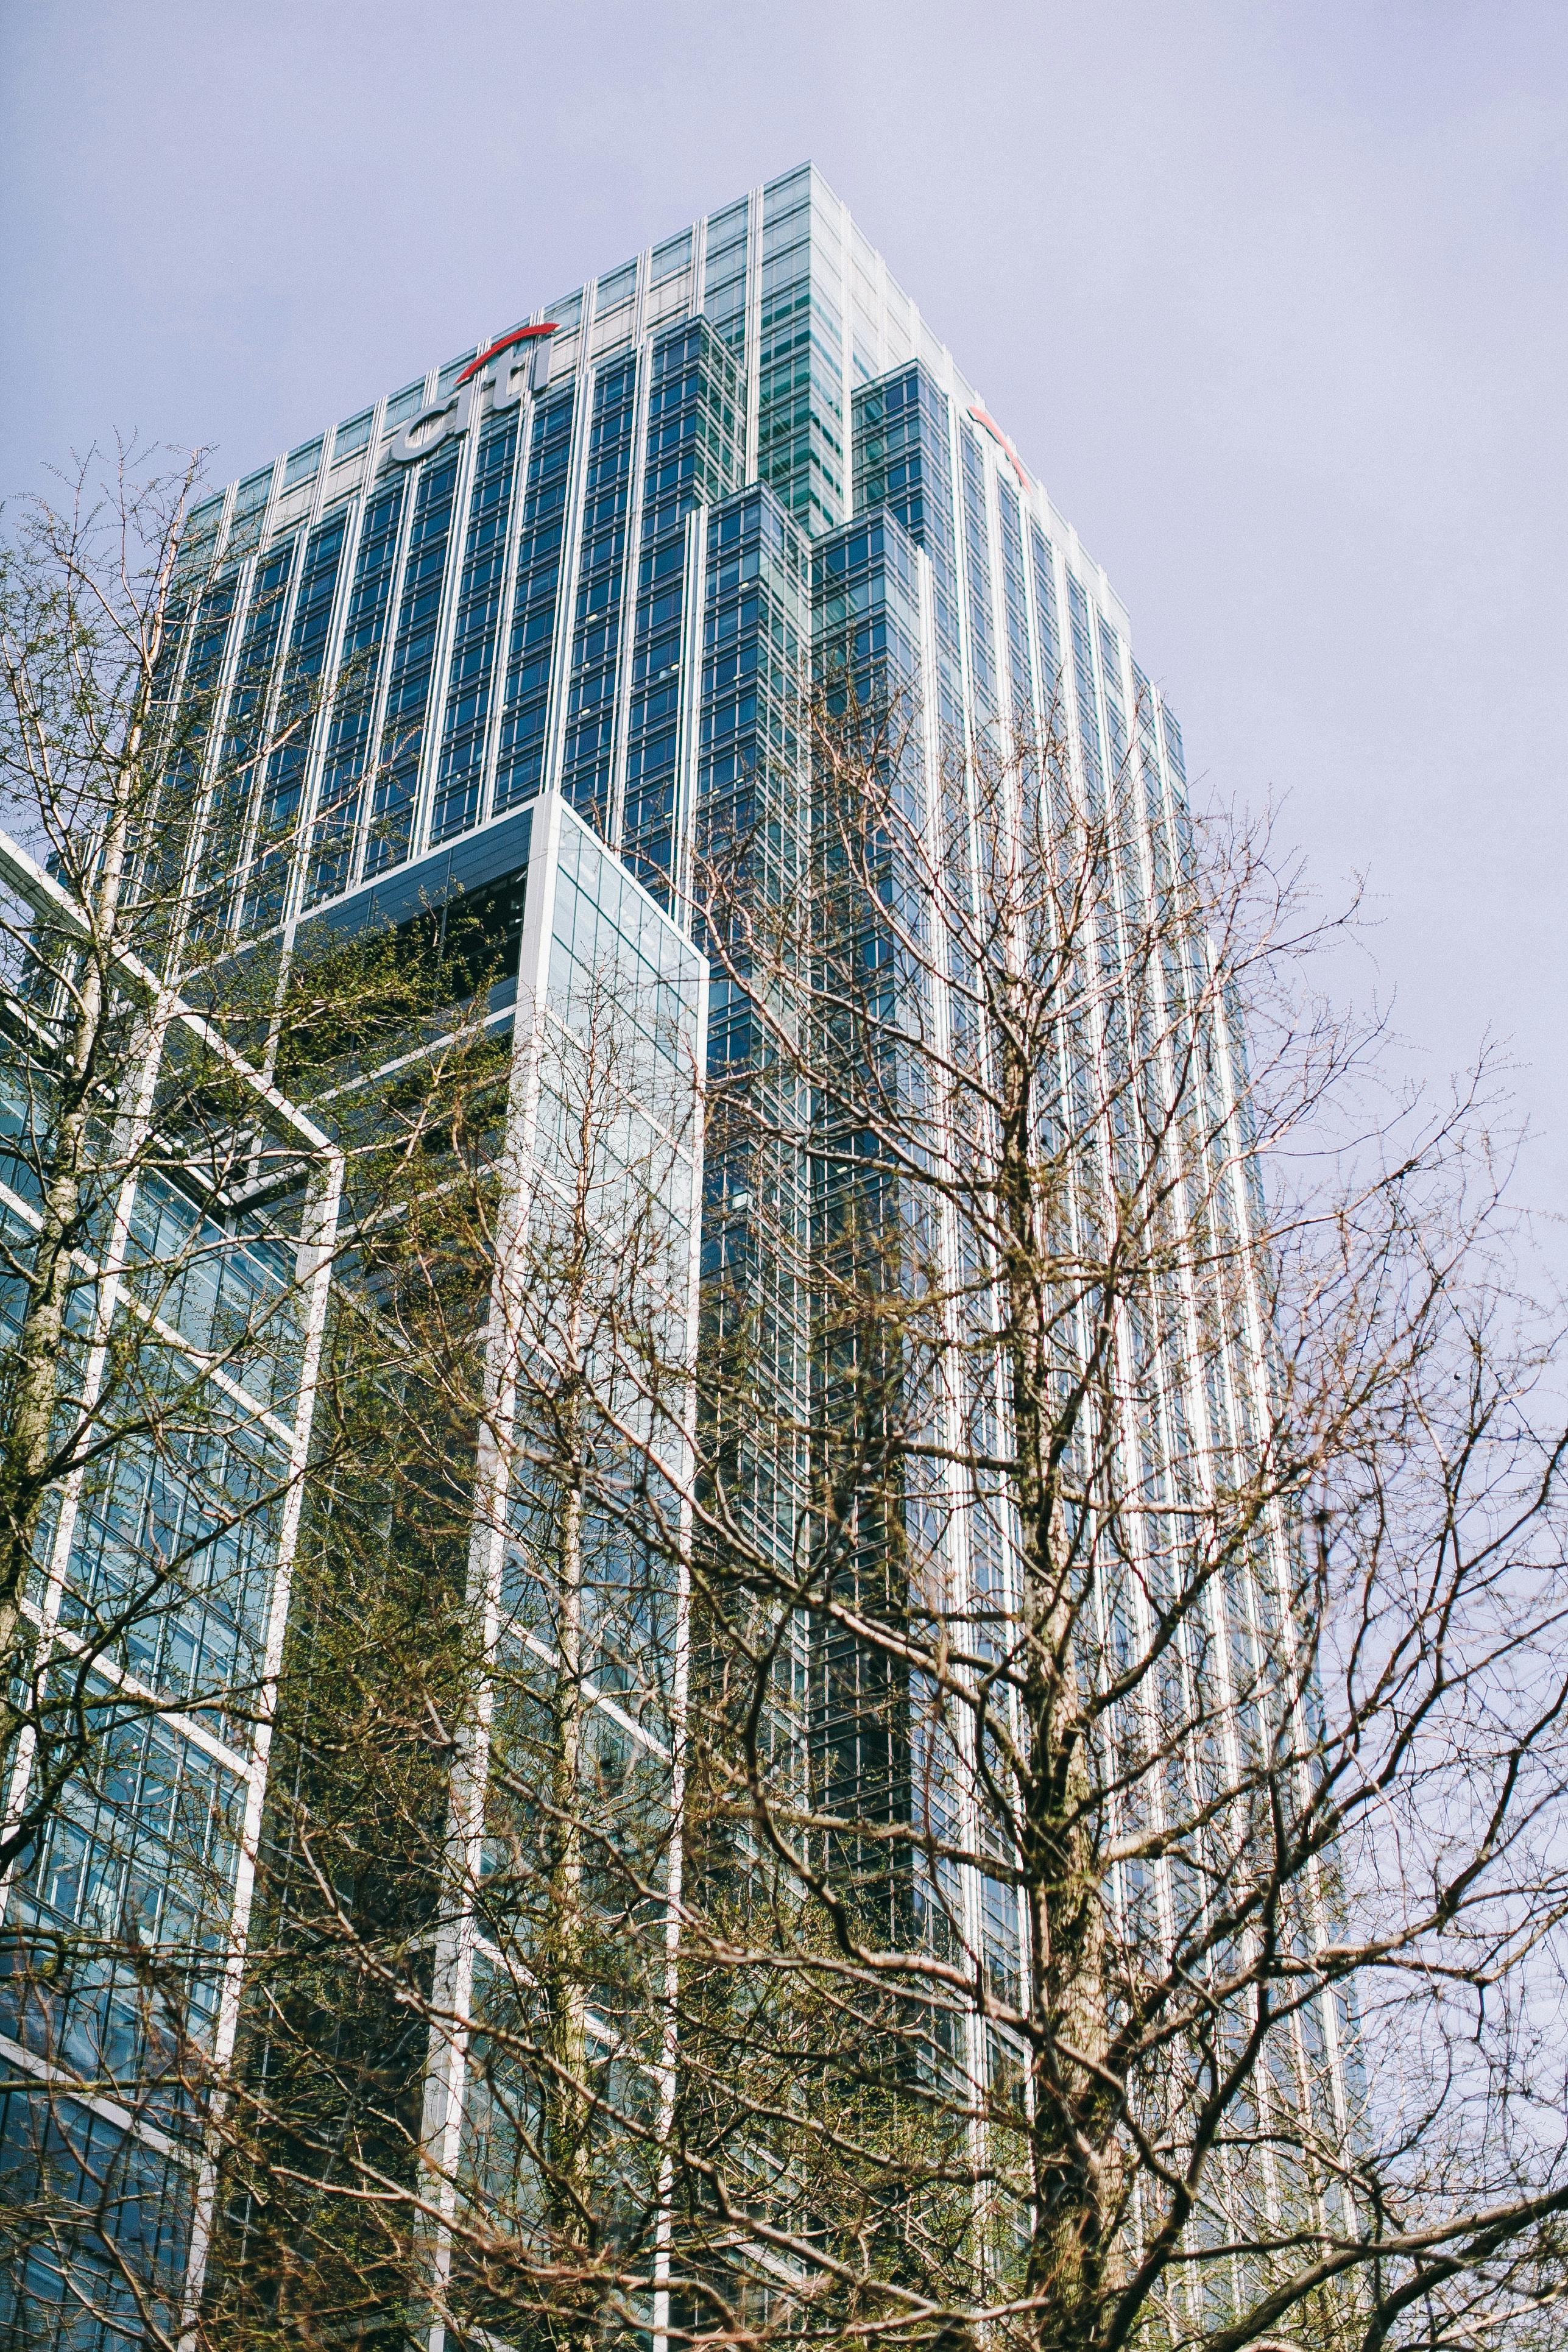 Low Angle Photo Of High-Rise Building · Free Stock Photo